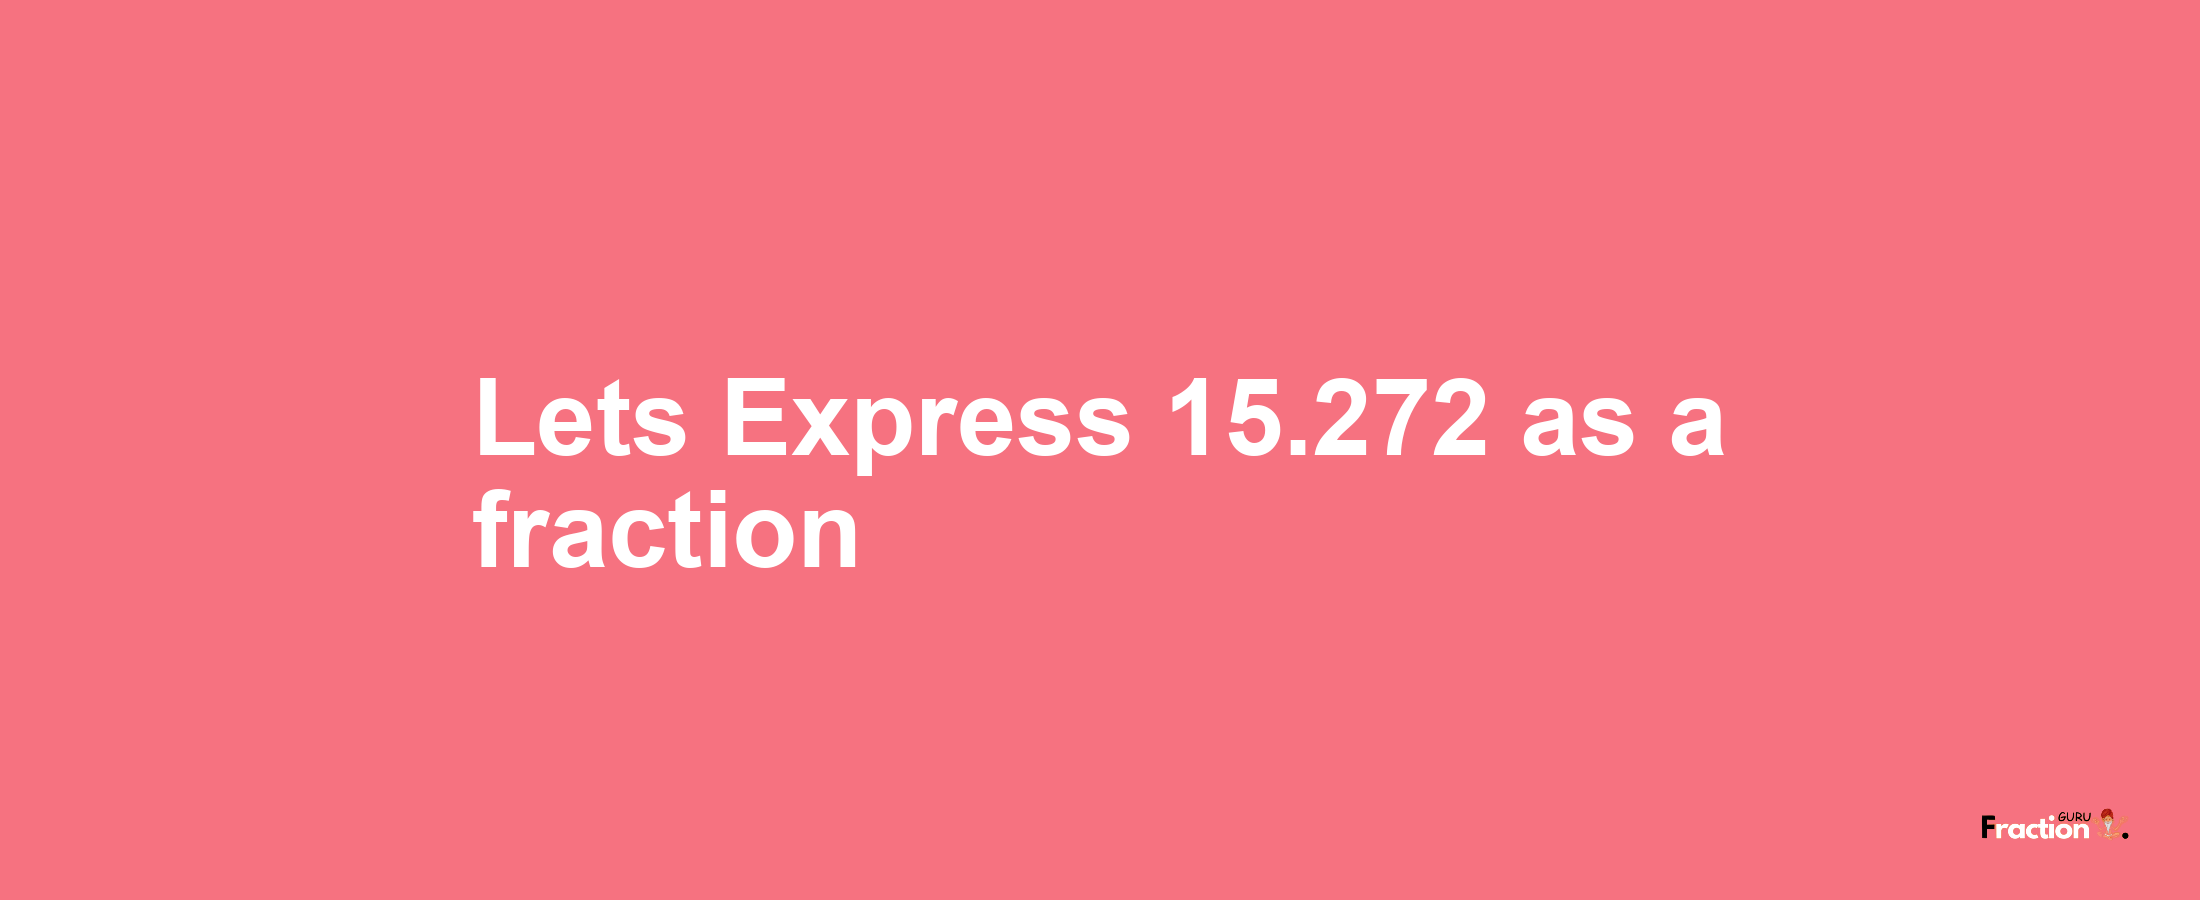 Lets Express 15.272 as afraction